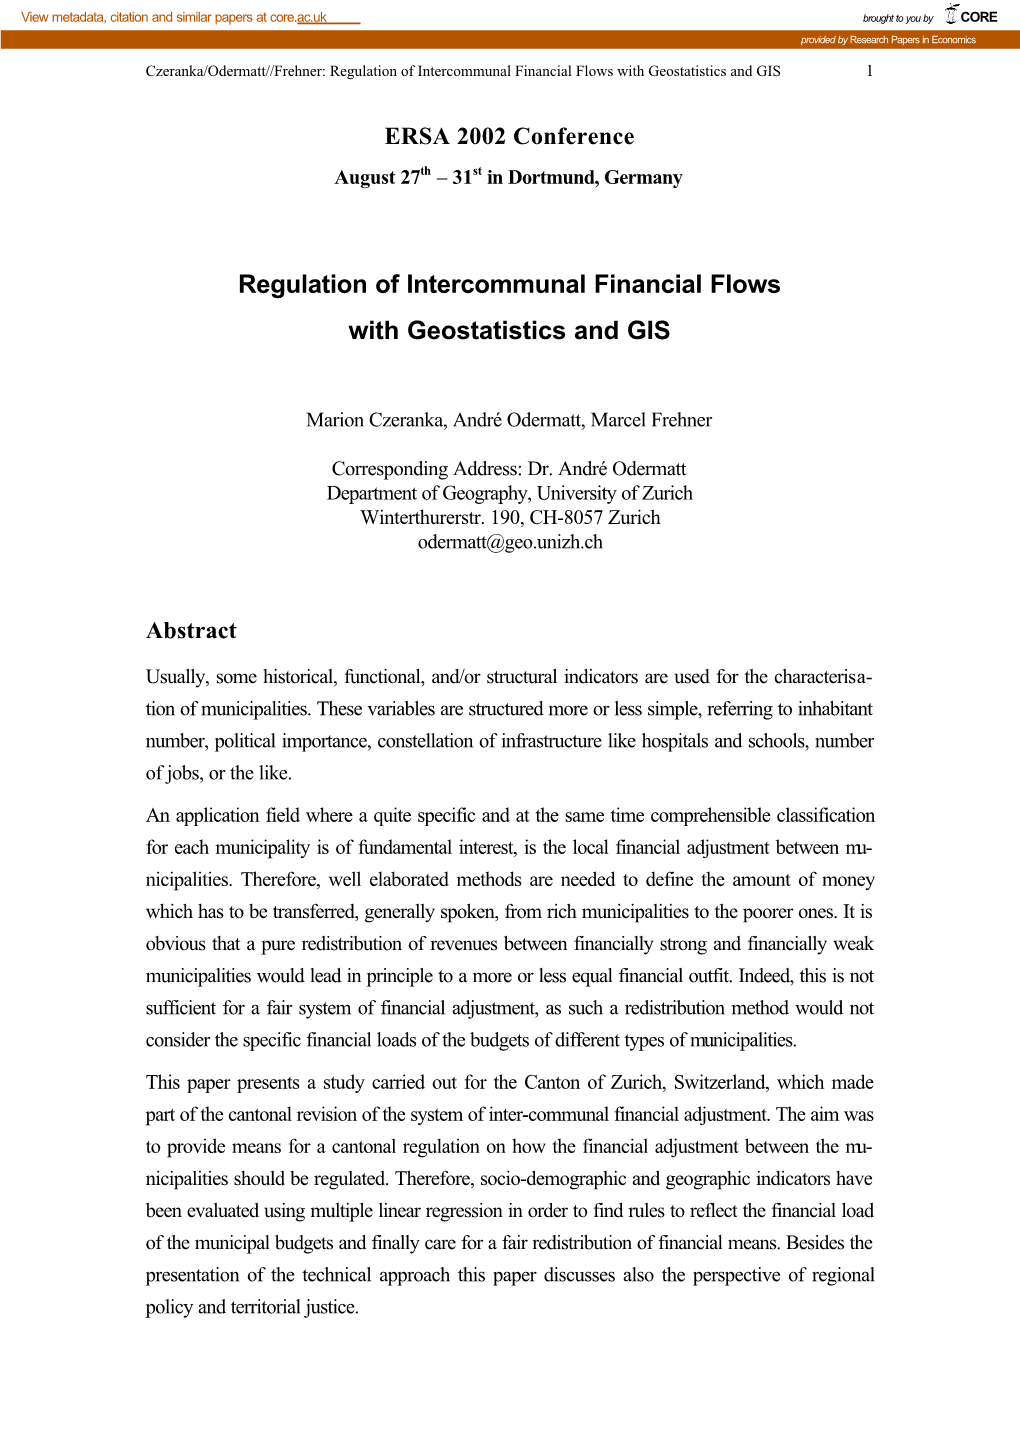 Regulation of Intercommunal Financial Flows with Geostatistics and GIS 1